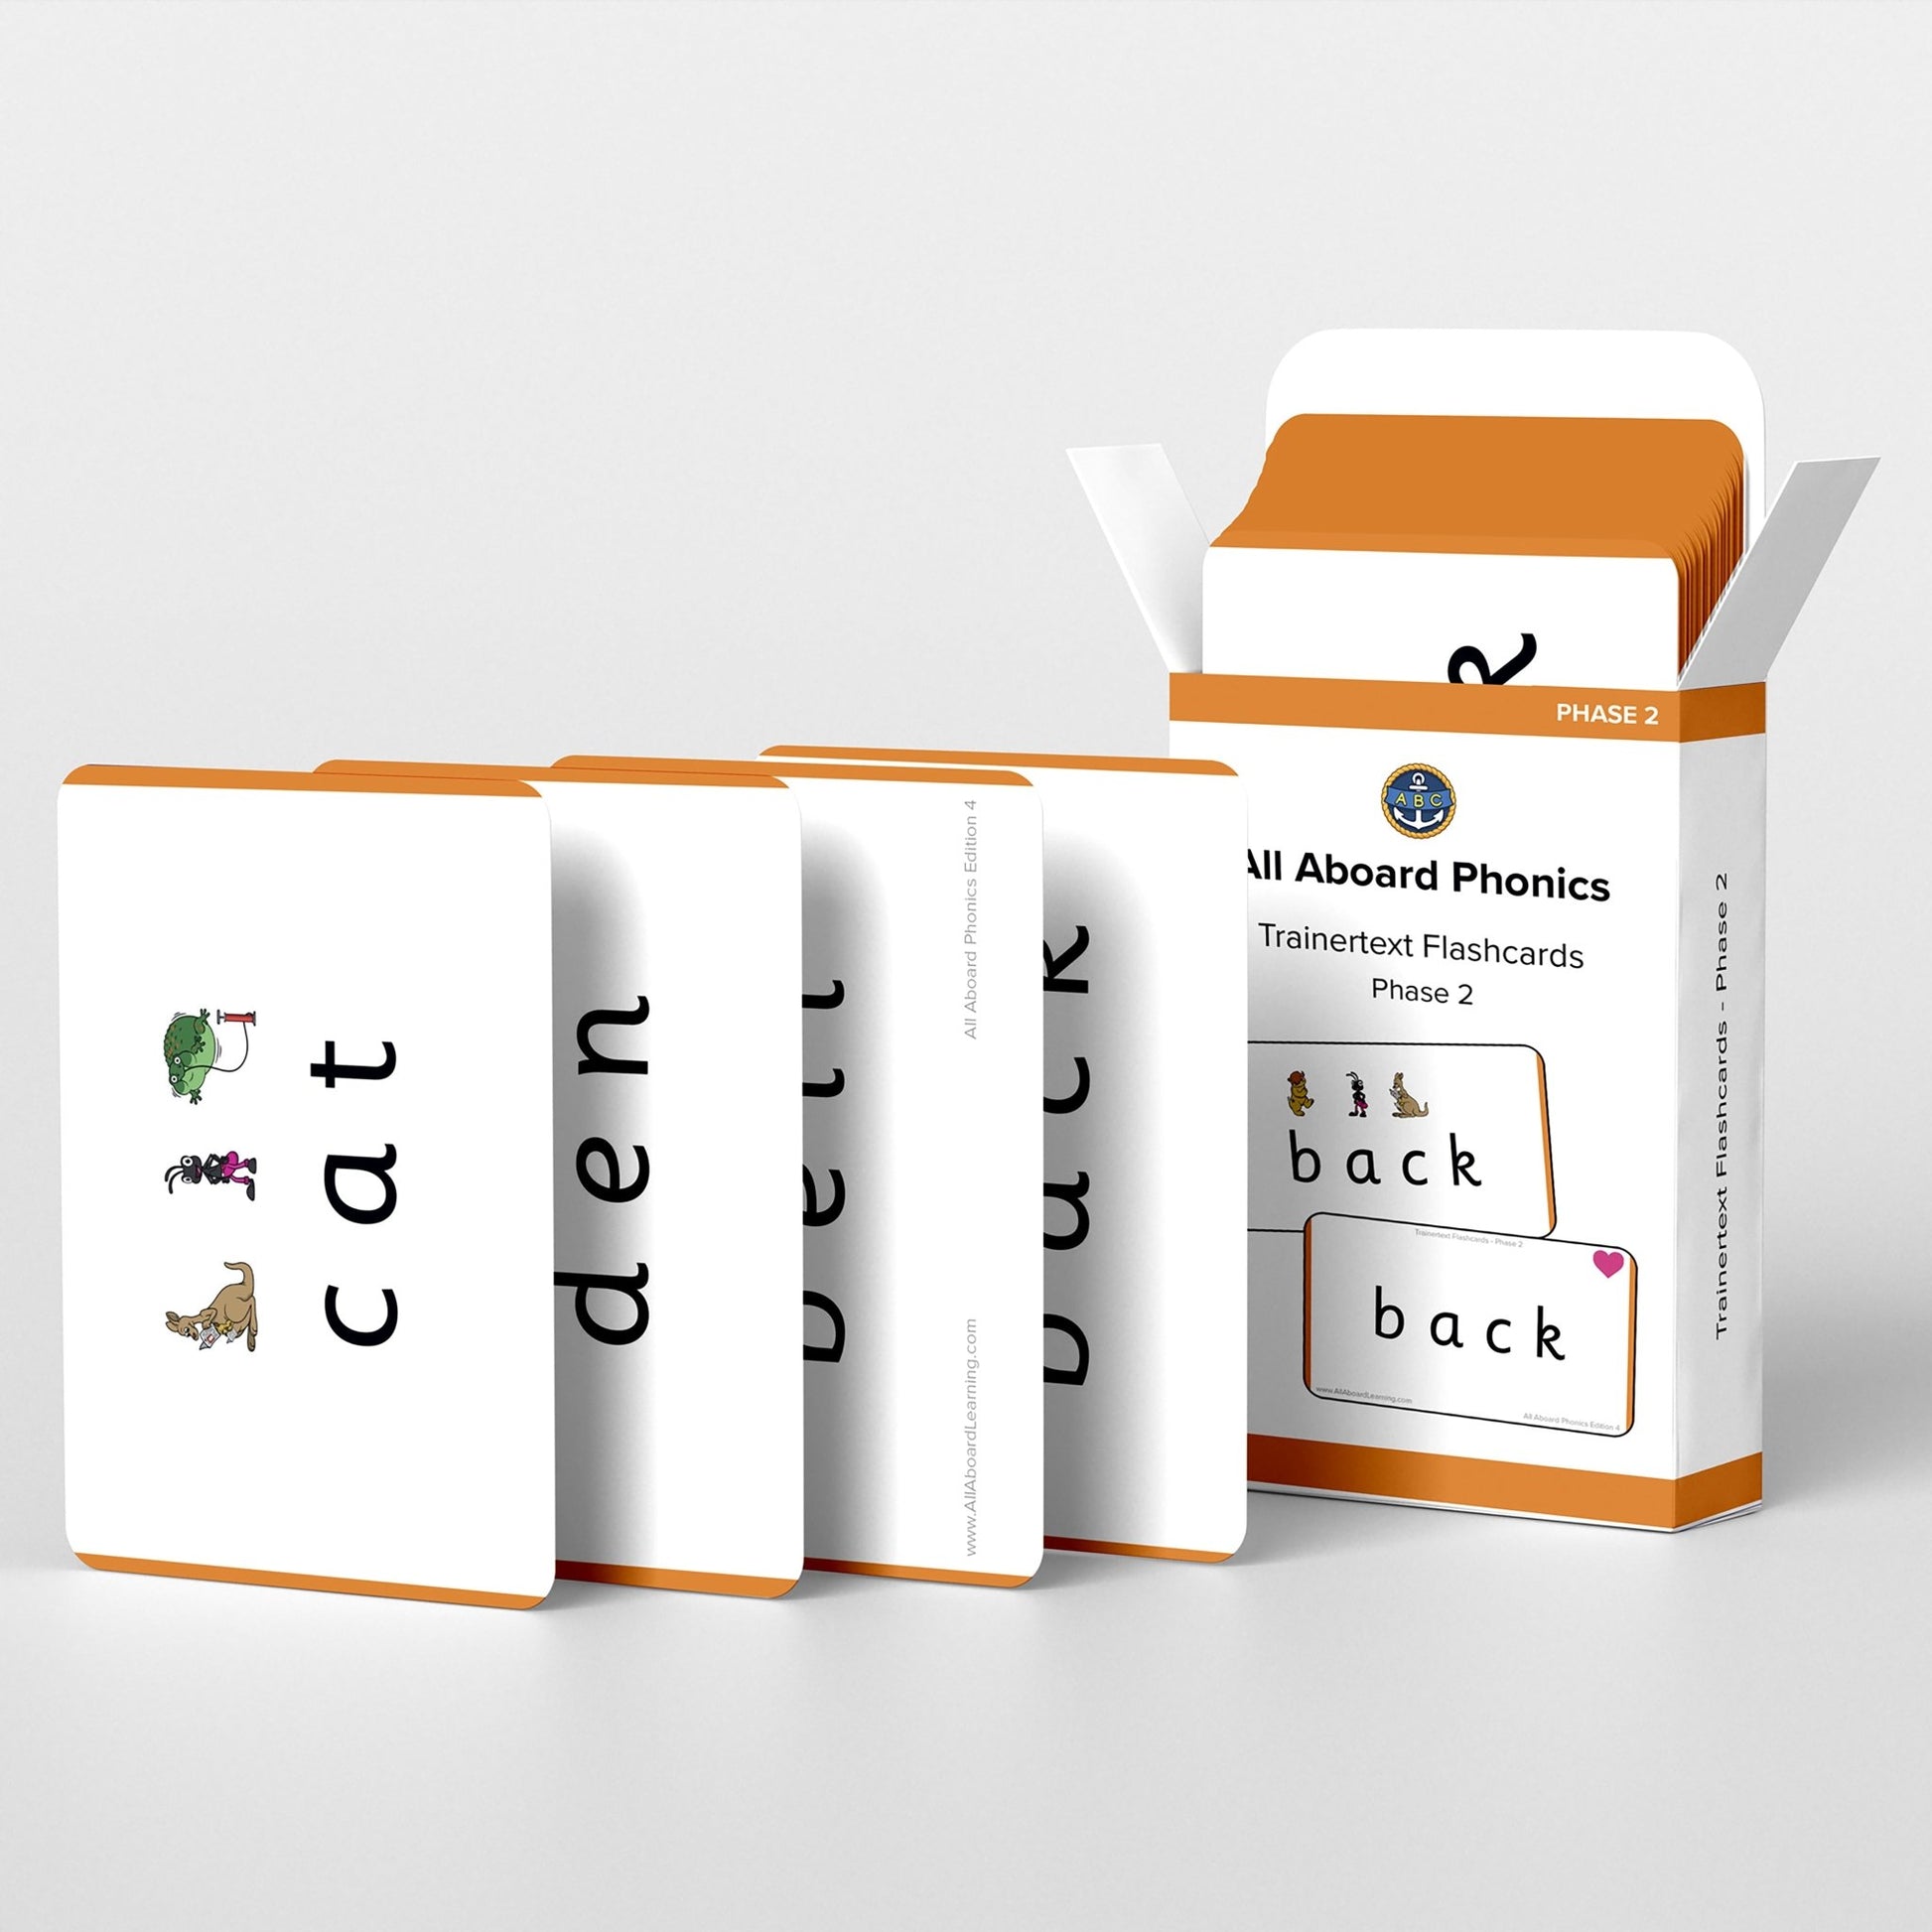 Trainertext Flashcards - Phase 2 - All Aboard Learning Ltd